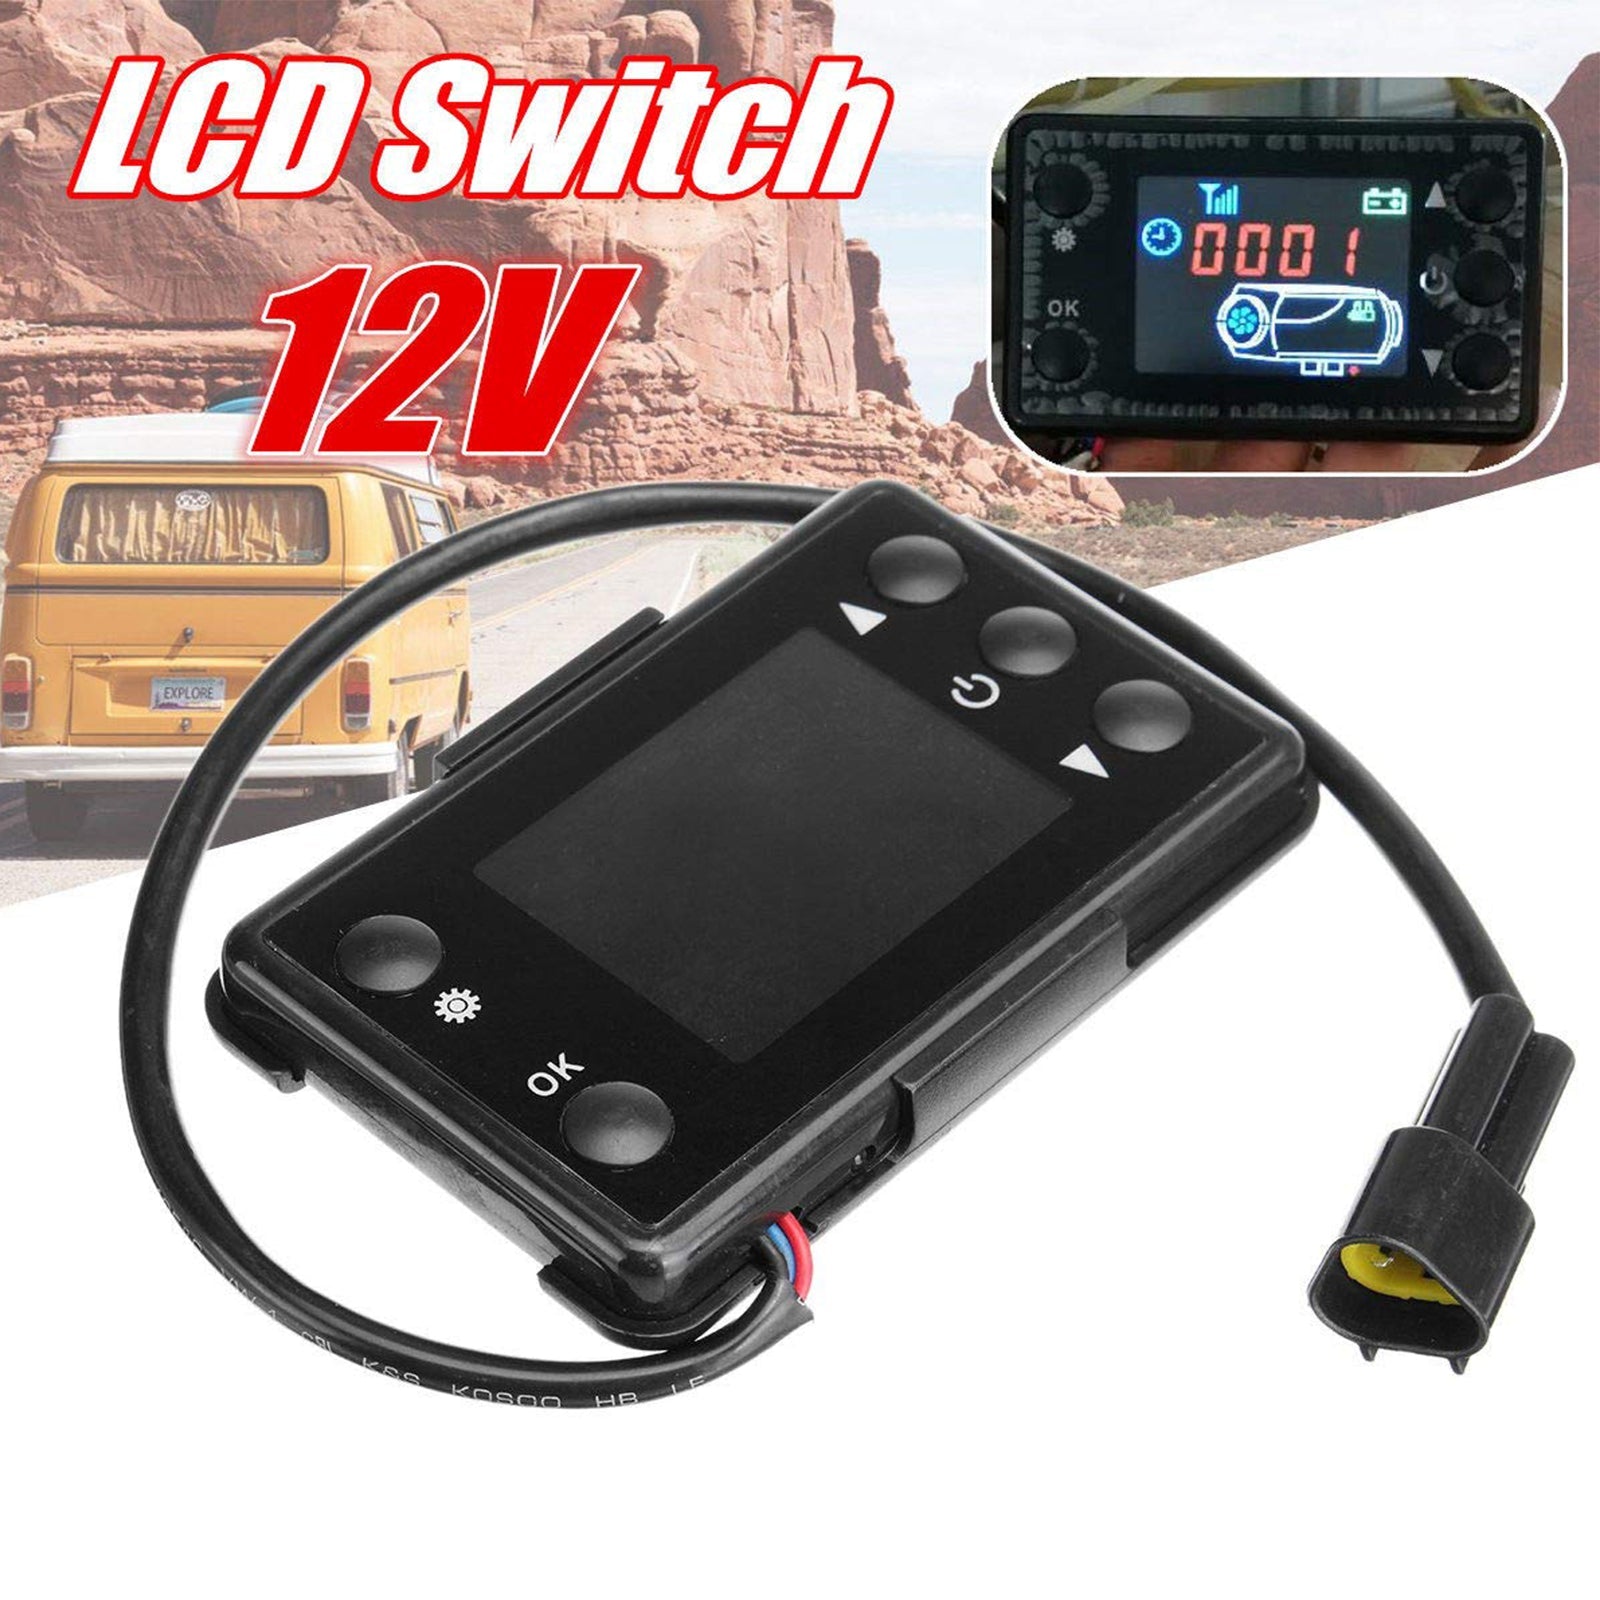 Triclicks LCD Switch Controller with 4 Button Remote Control For Car Diesel Air Heater, 12V Air Parking Heater With Remote Control